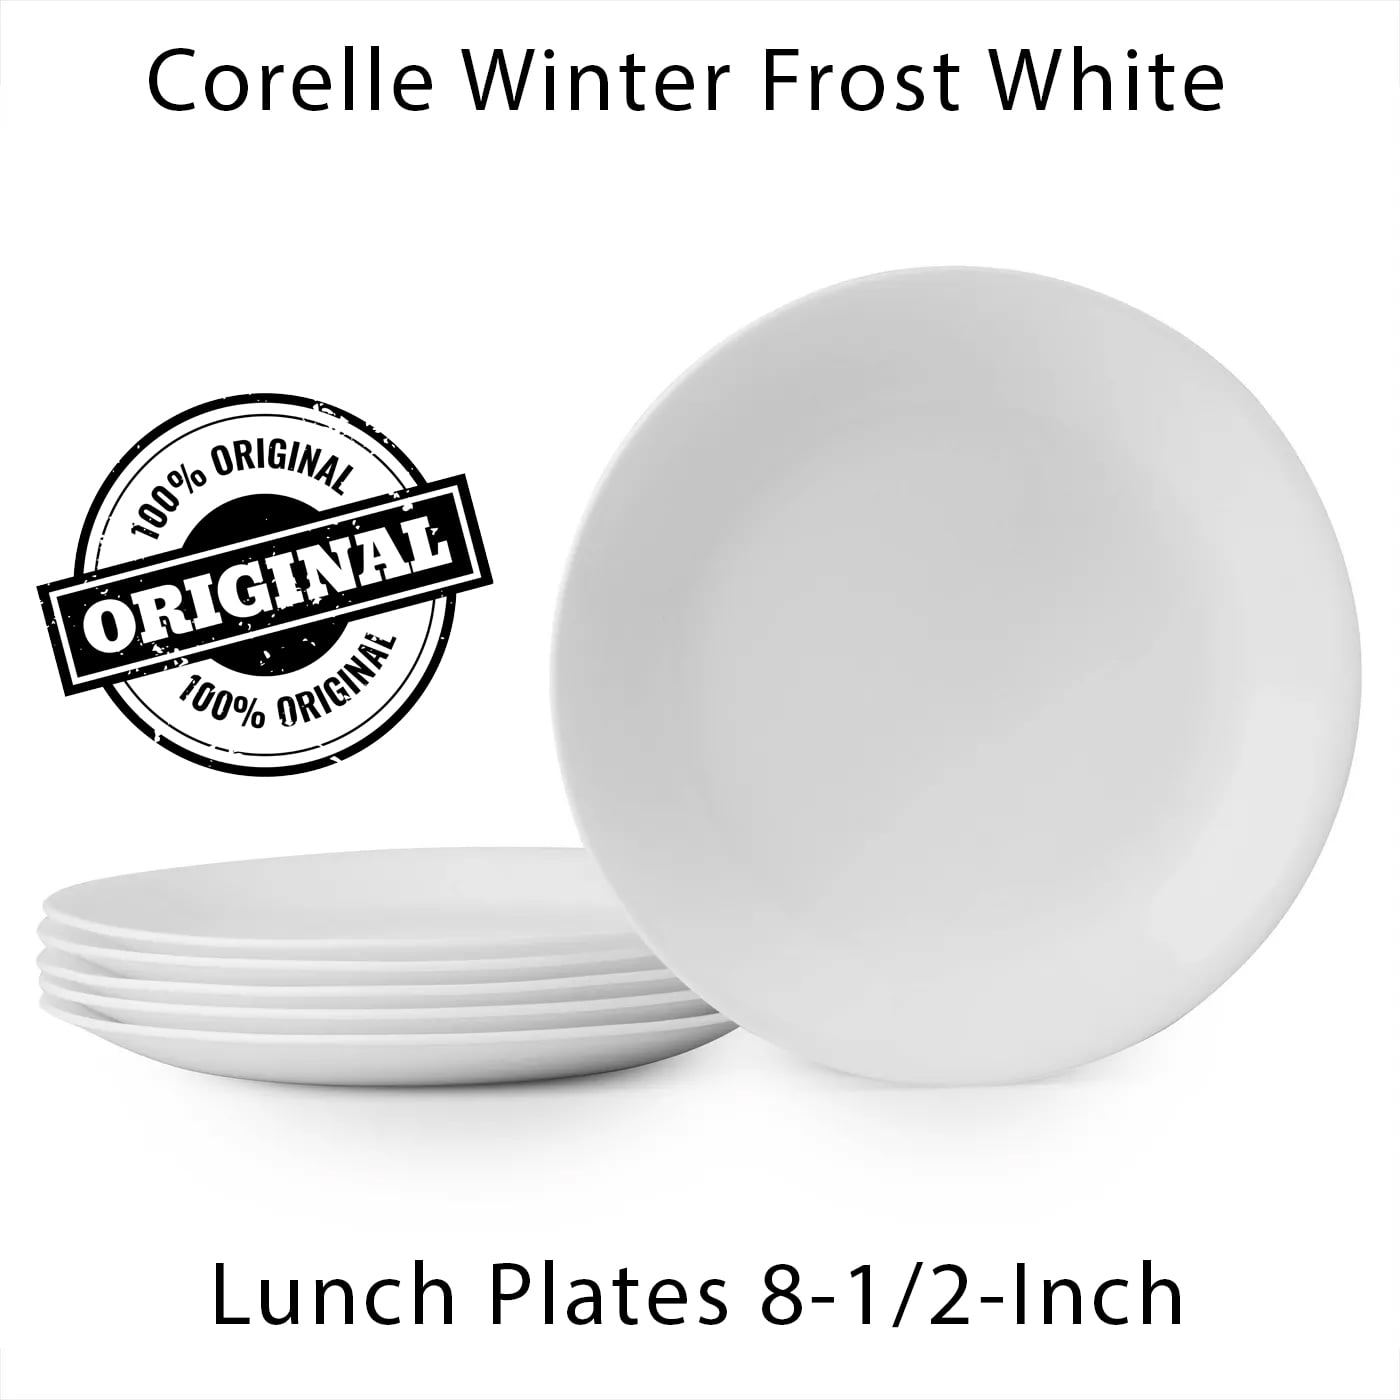 SALAD PLATES 8.5 INCH DIAMETER BRAND NEW x 8 CORELLE WINTER FROST WHITE LUNCH 